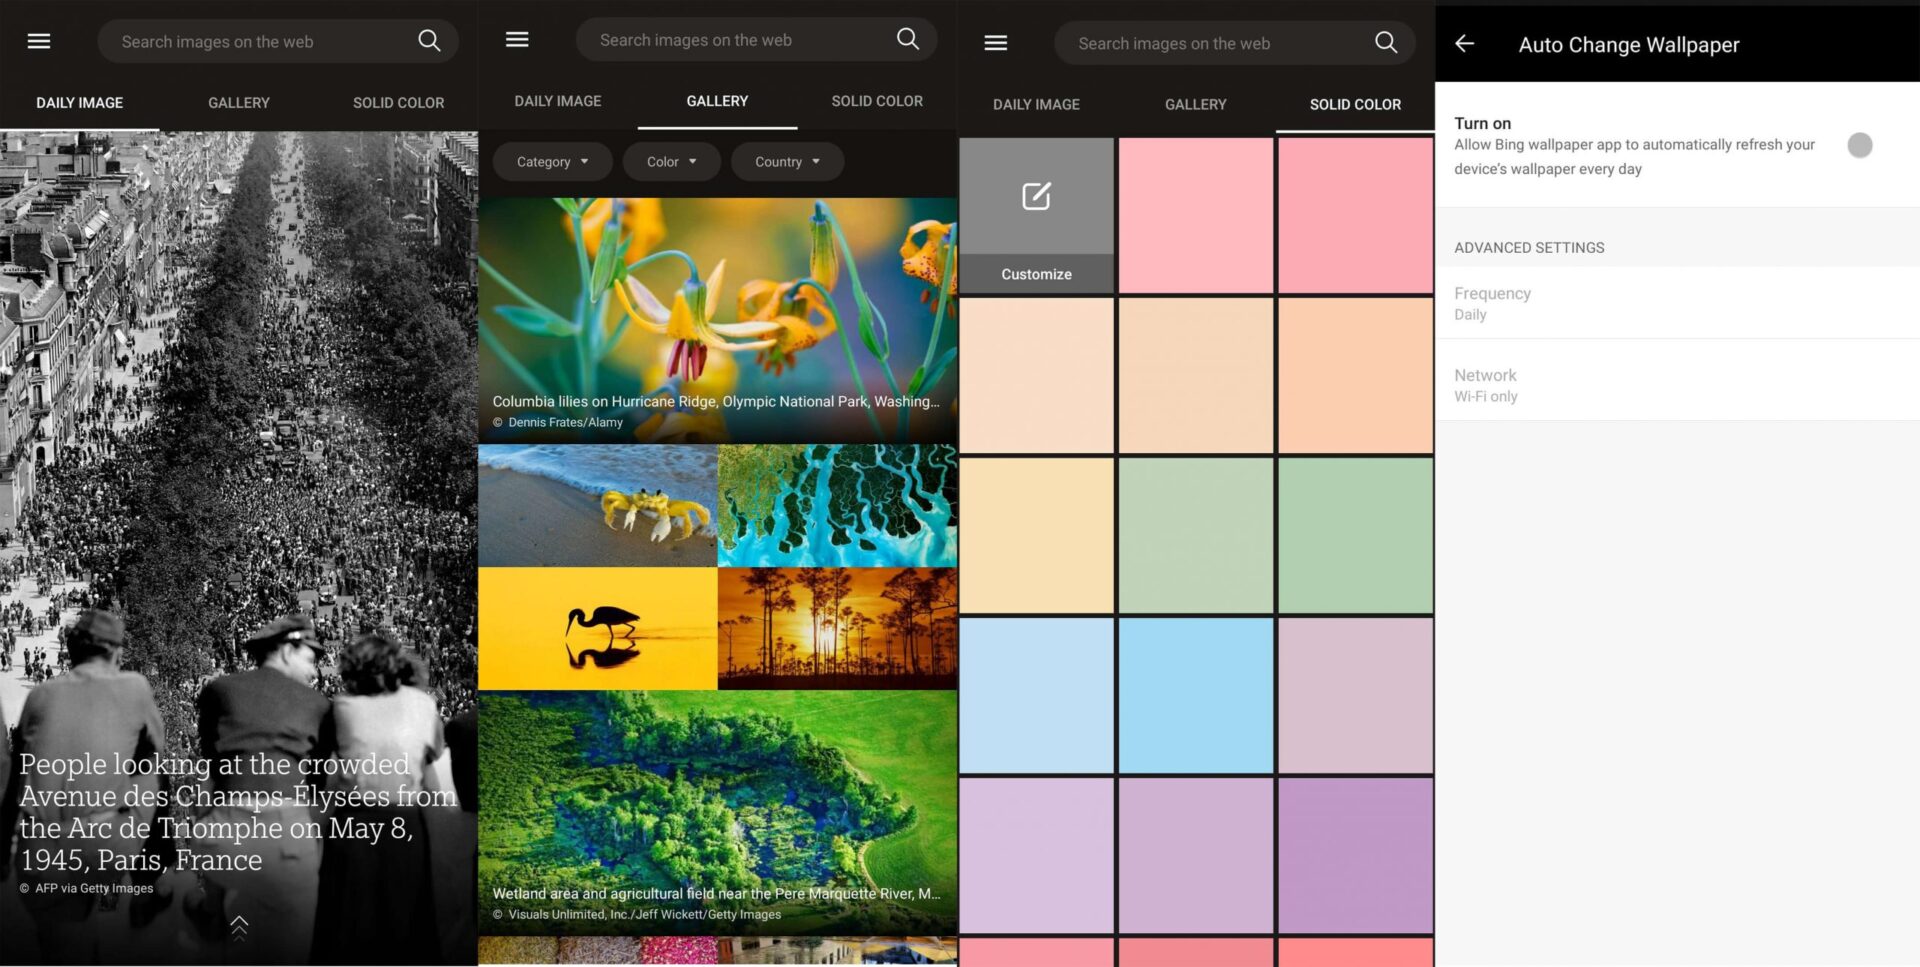 Microsoft Launched Bing Wallpaper App for Android - TrueTech